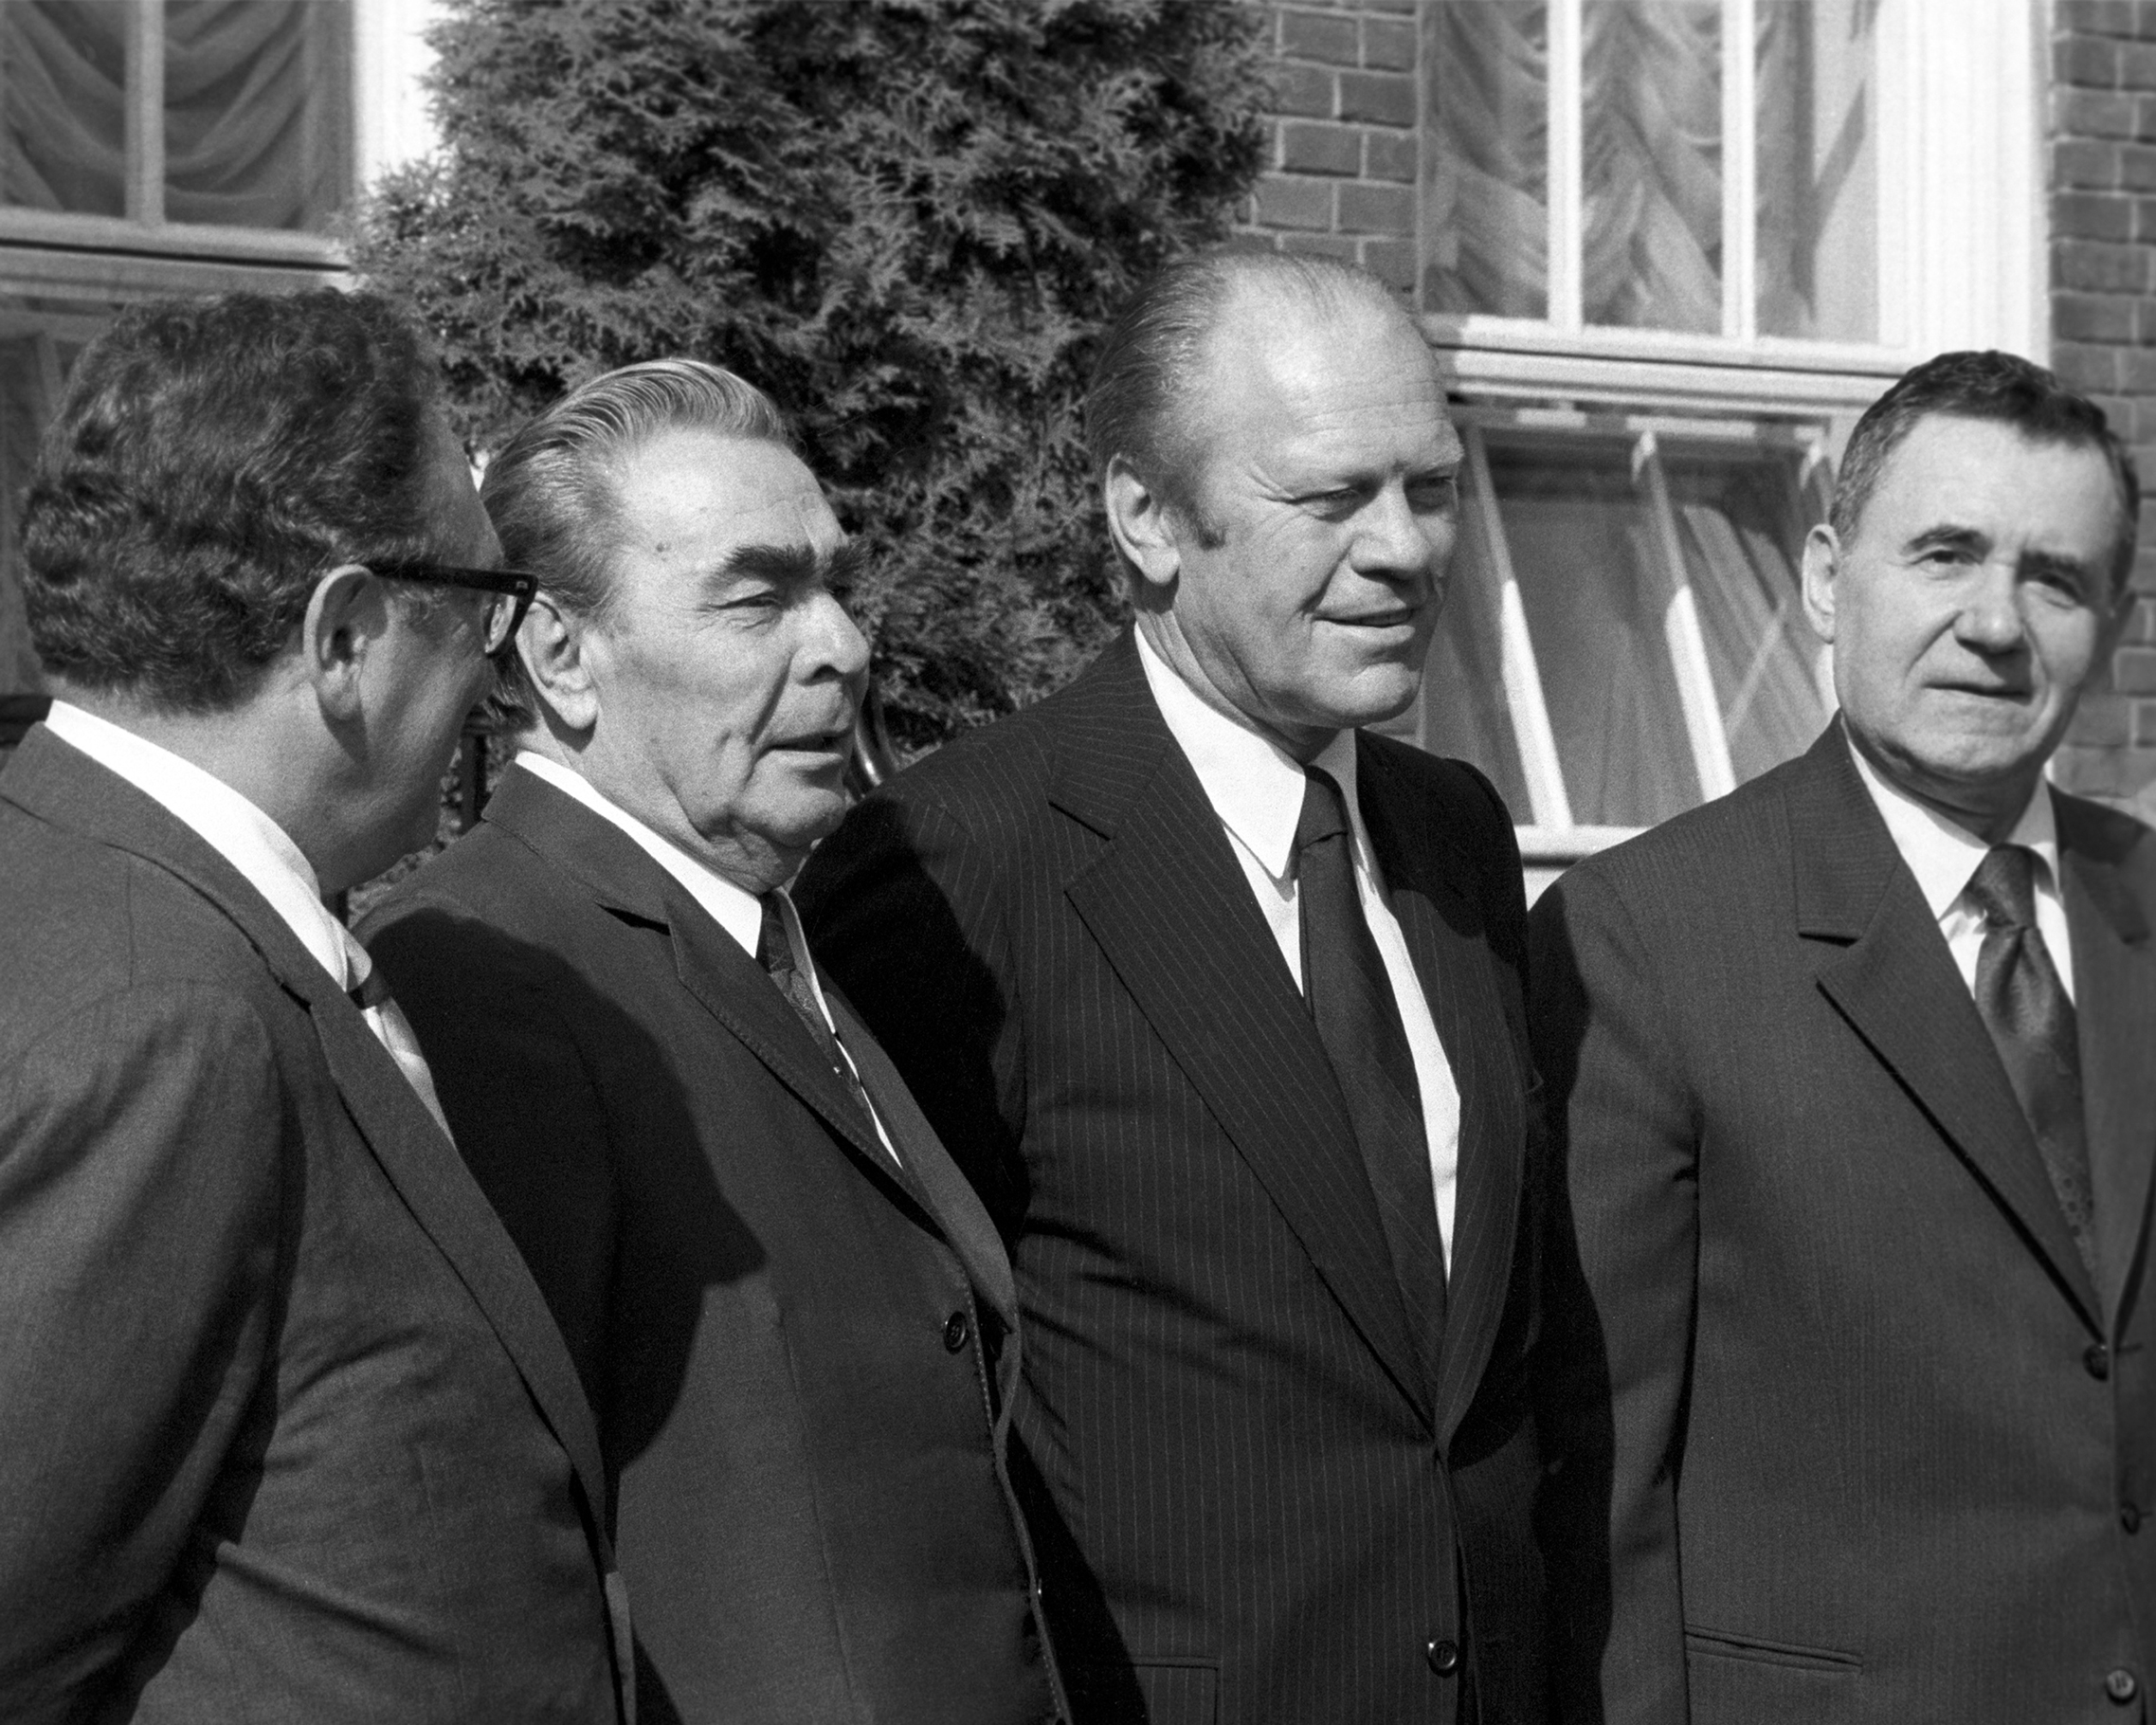 A photo showing Soviet leader Leonid Brezhnev and U.S. President Gerald Ford standing outside before the start of the Conference on Security and Cooperation in Europe in Helsinki, Finland on July 14, 1957.